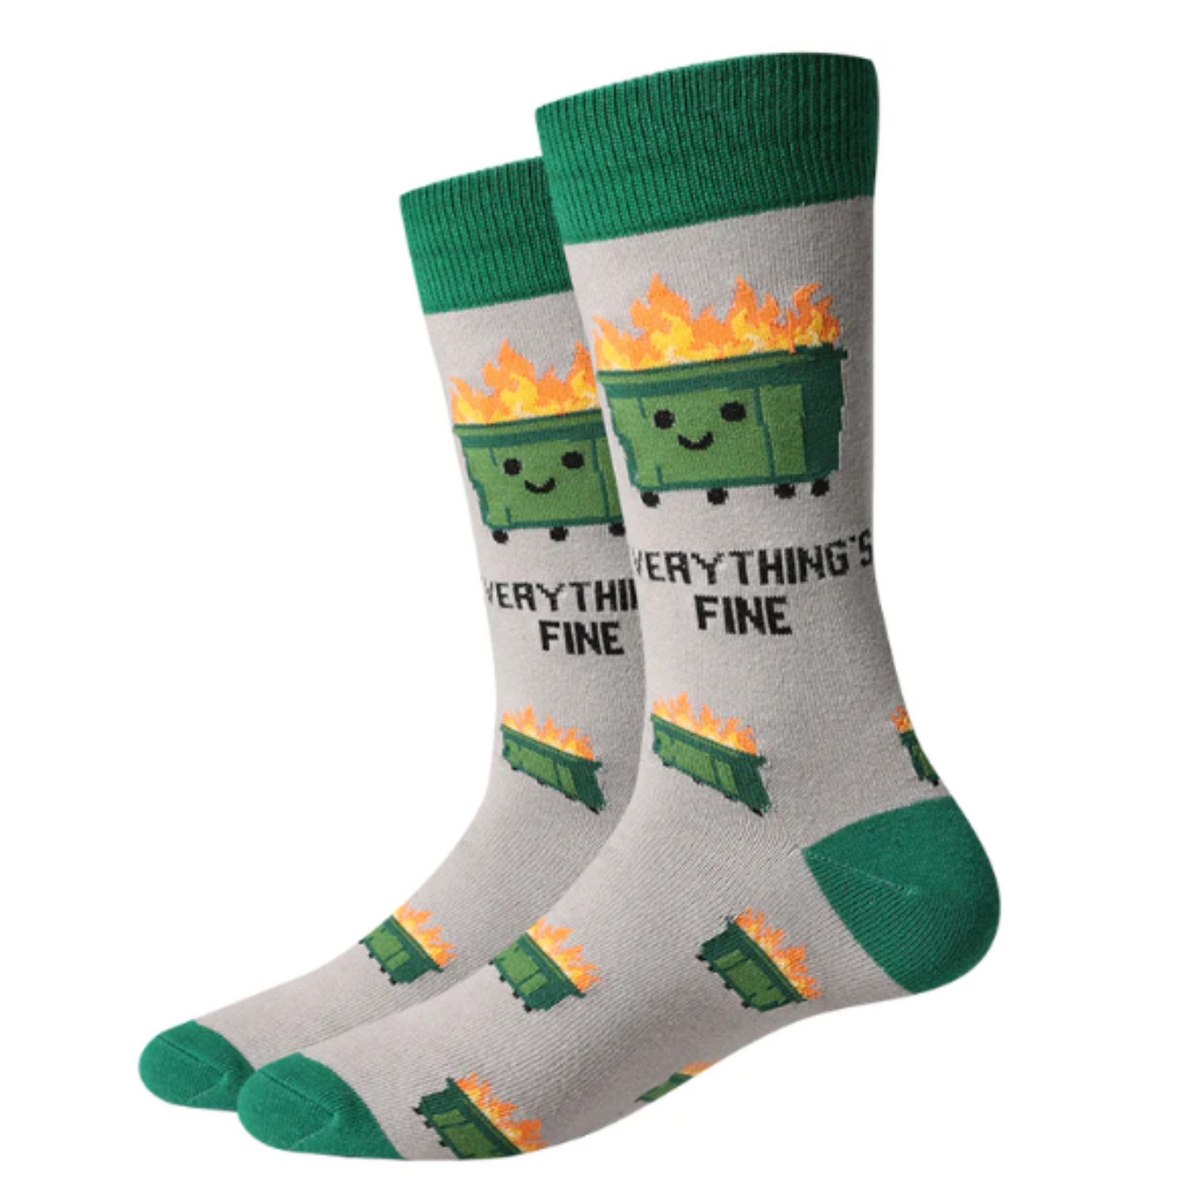 Sock Harbor Everything&#39;s Fine men&#39;s crew sock featuring gray sock with green cuff, heel and toe. Sock has &quot;Everything&#39;s Fine&quot; written on it with image of smiling trash dumpster on fire. Socks shown on display. 